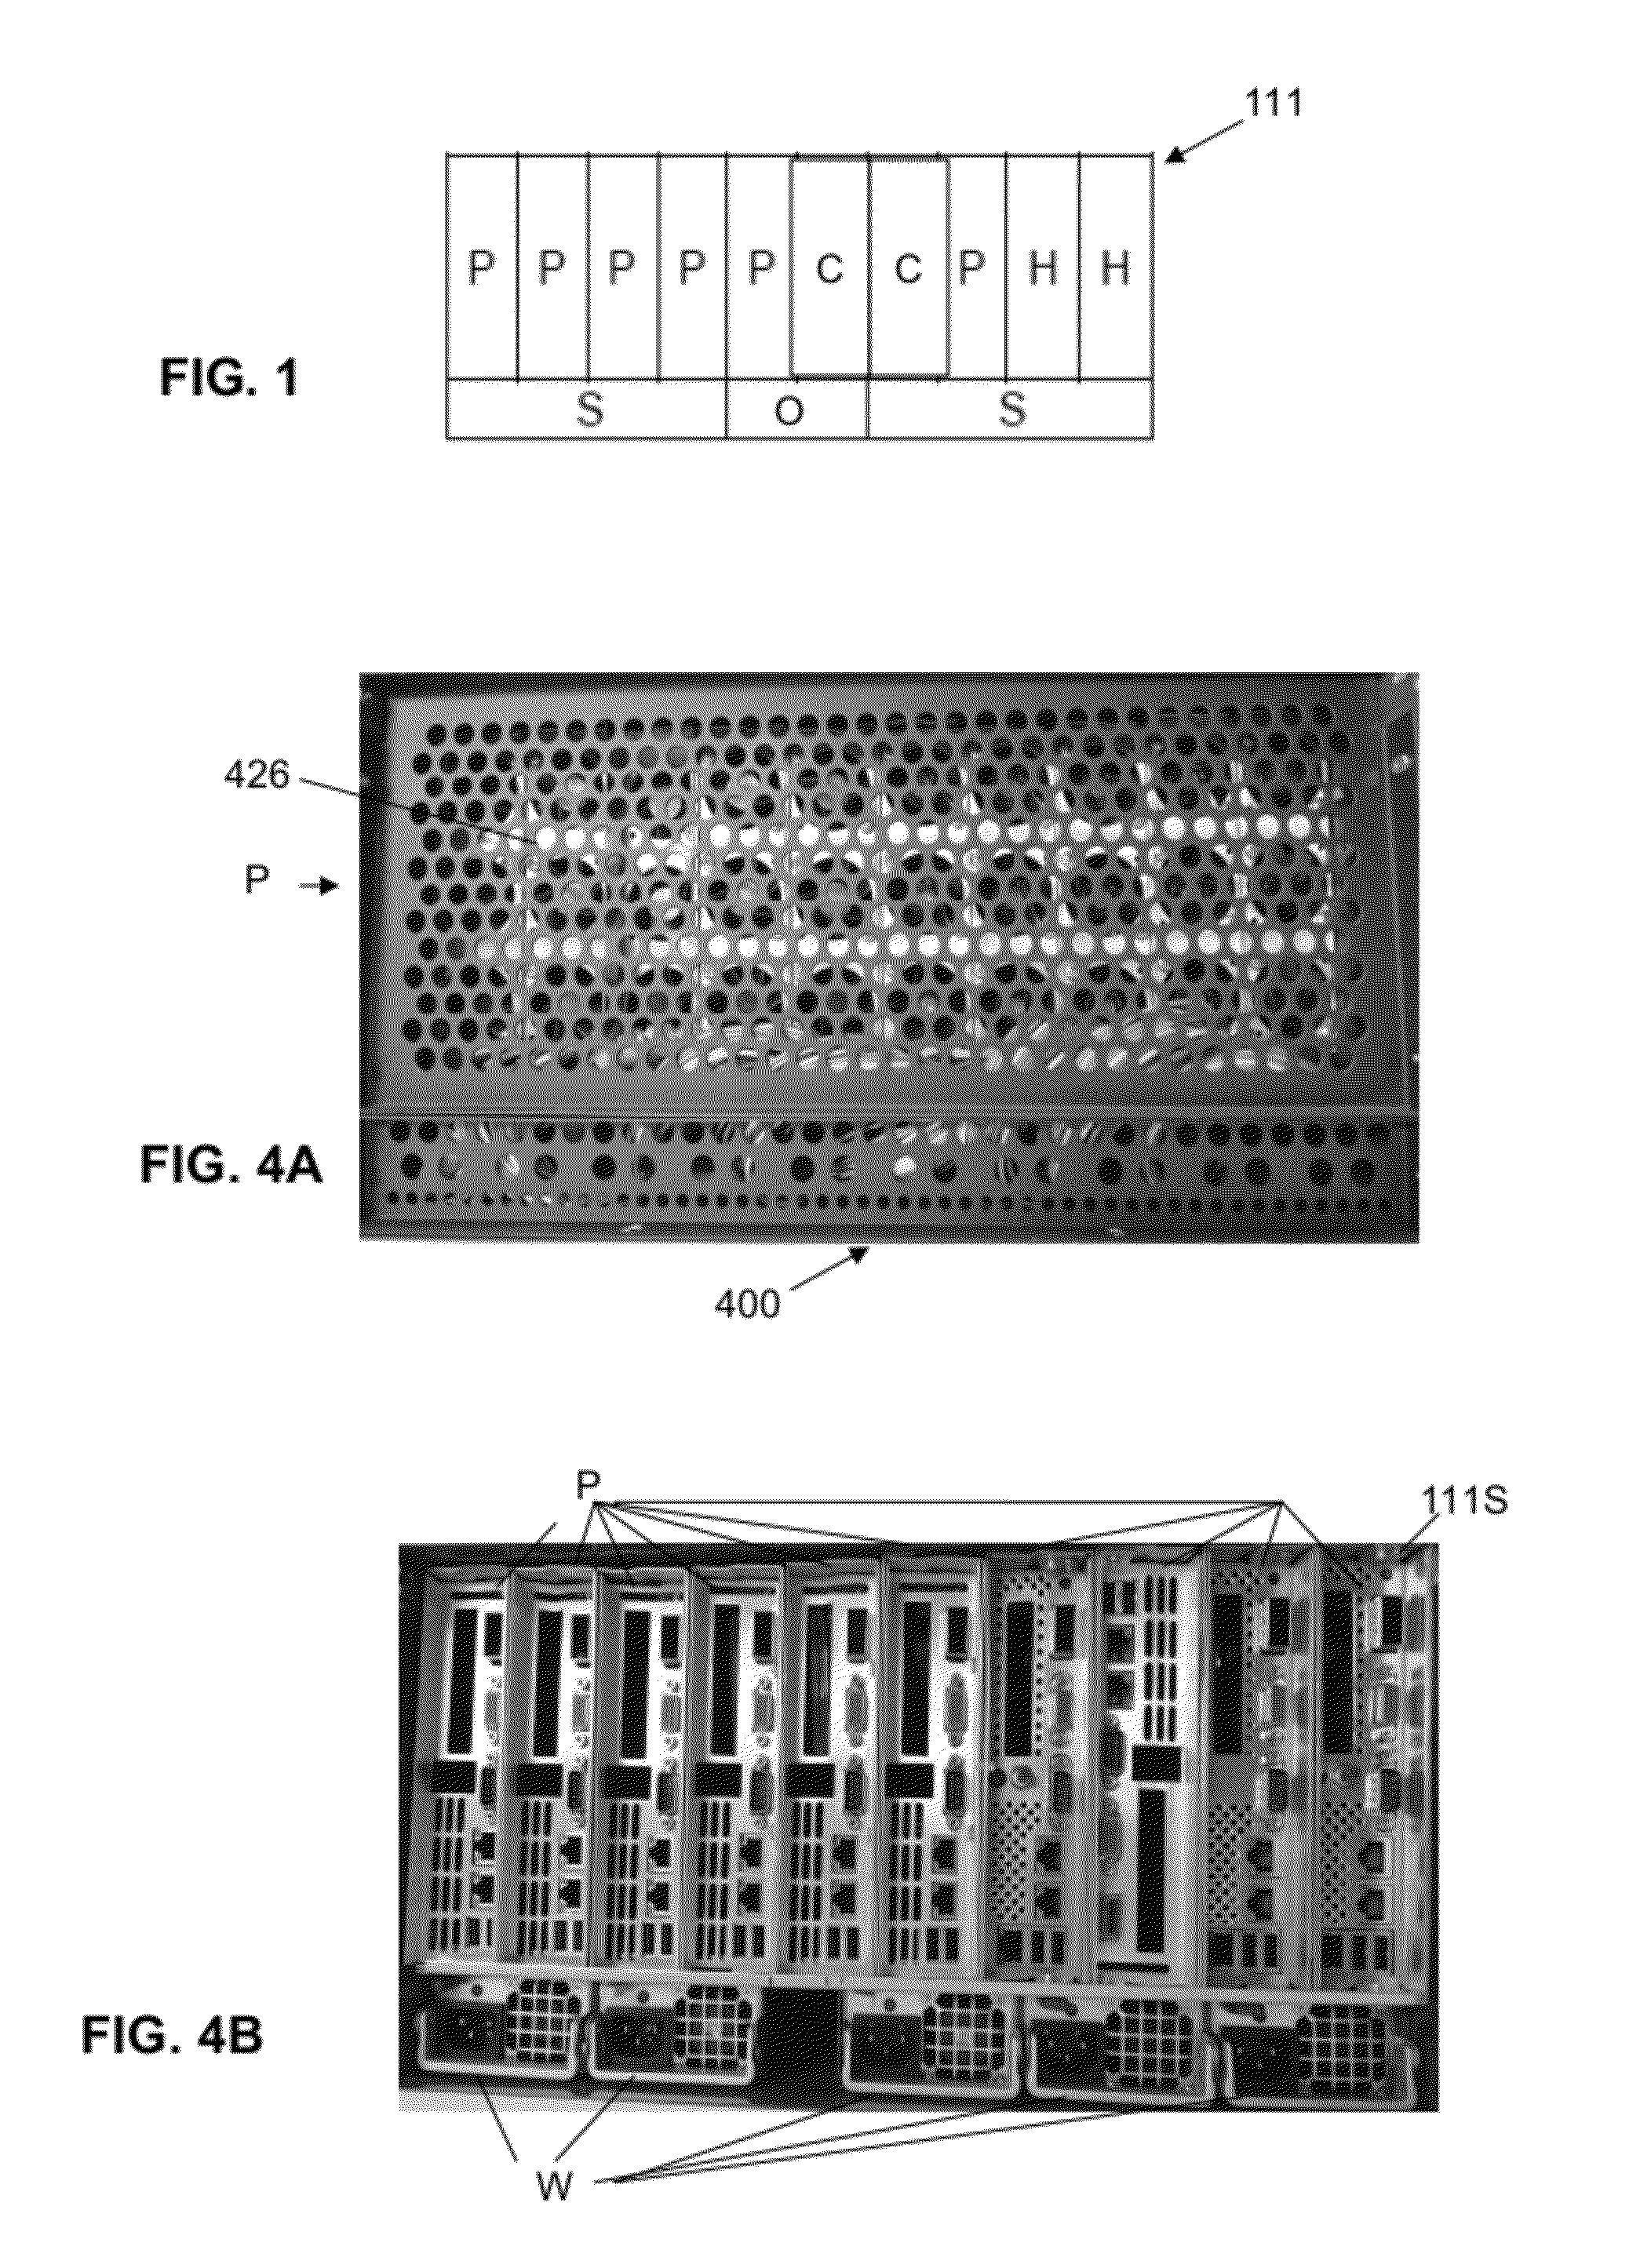 Modular Re-Configurable Computers and Storage Systems and Methods